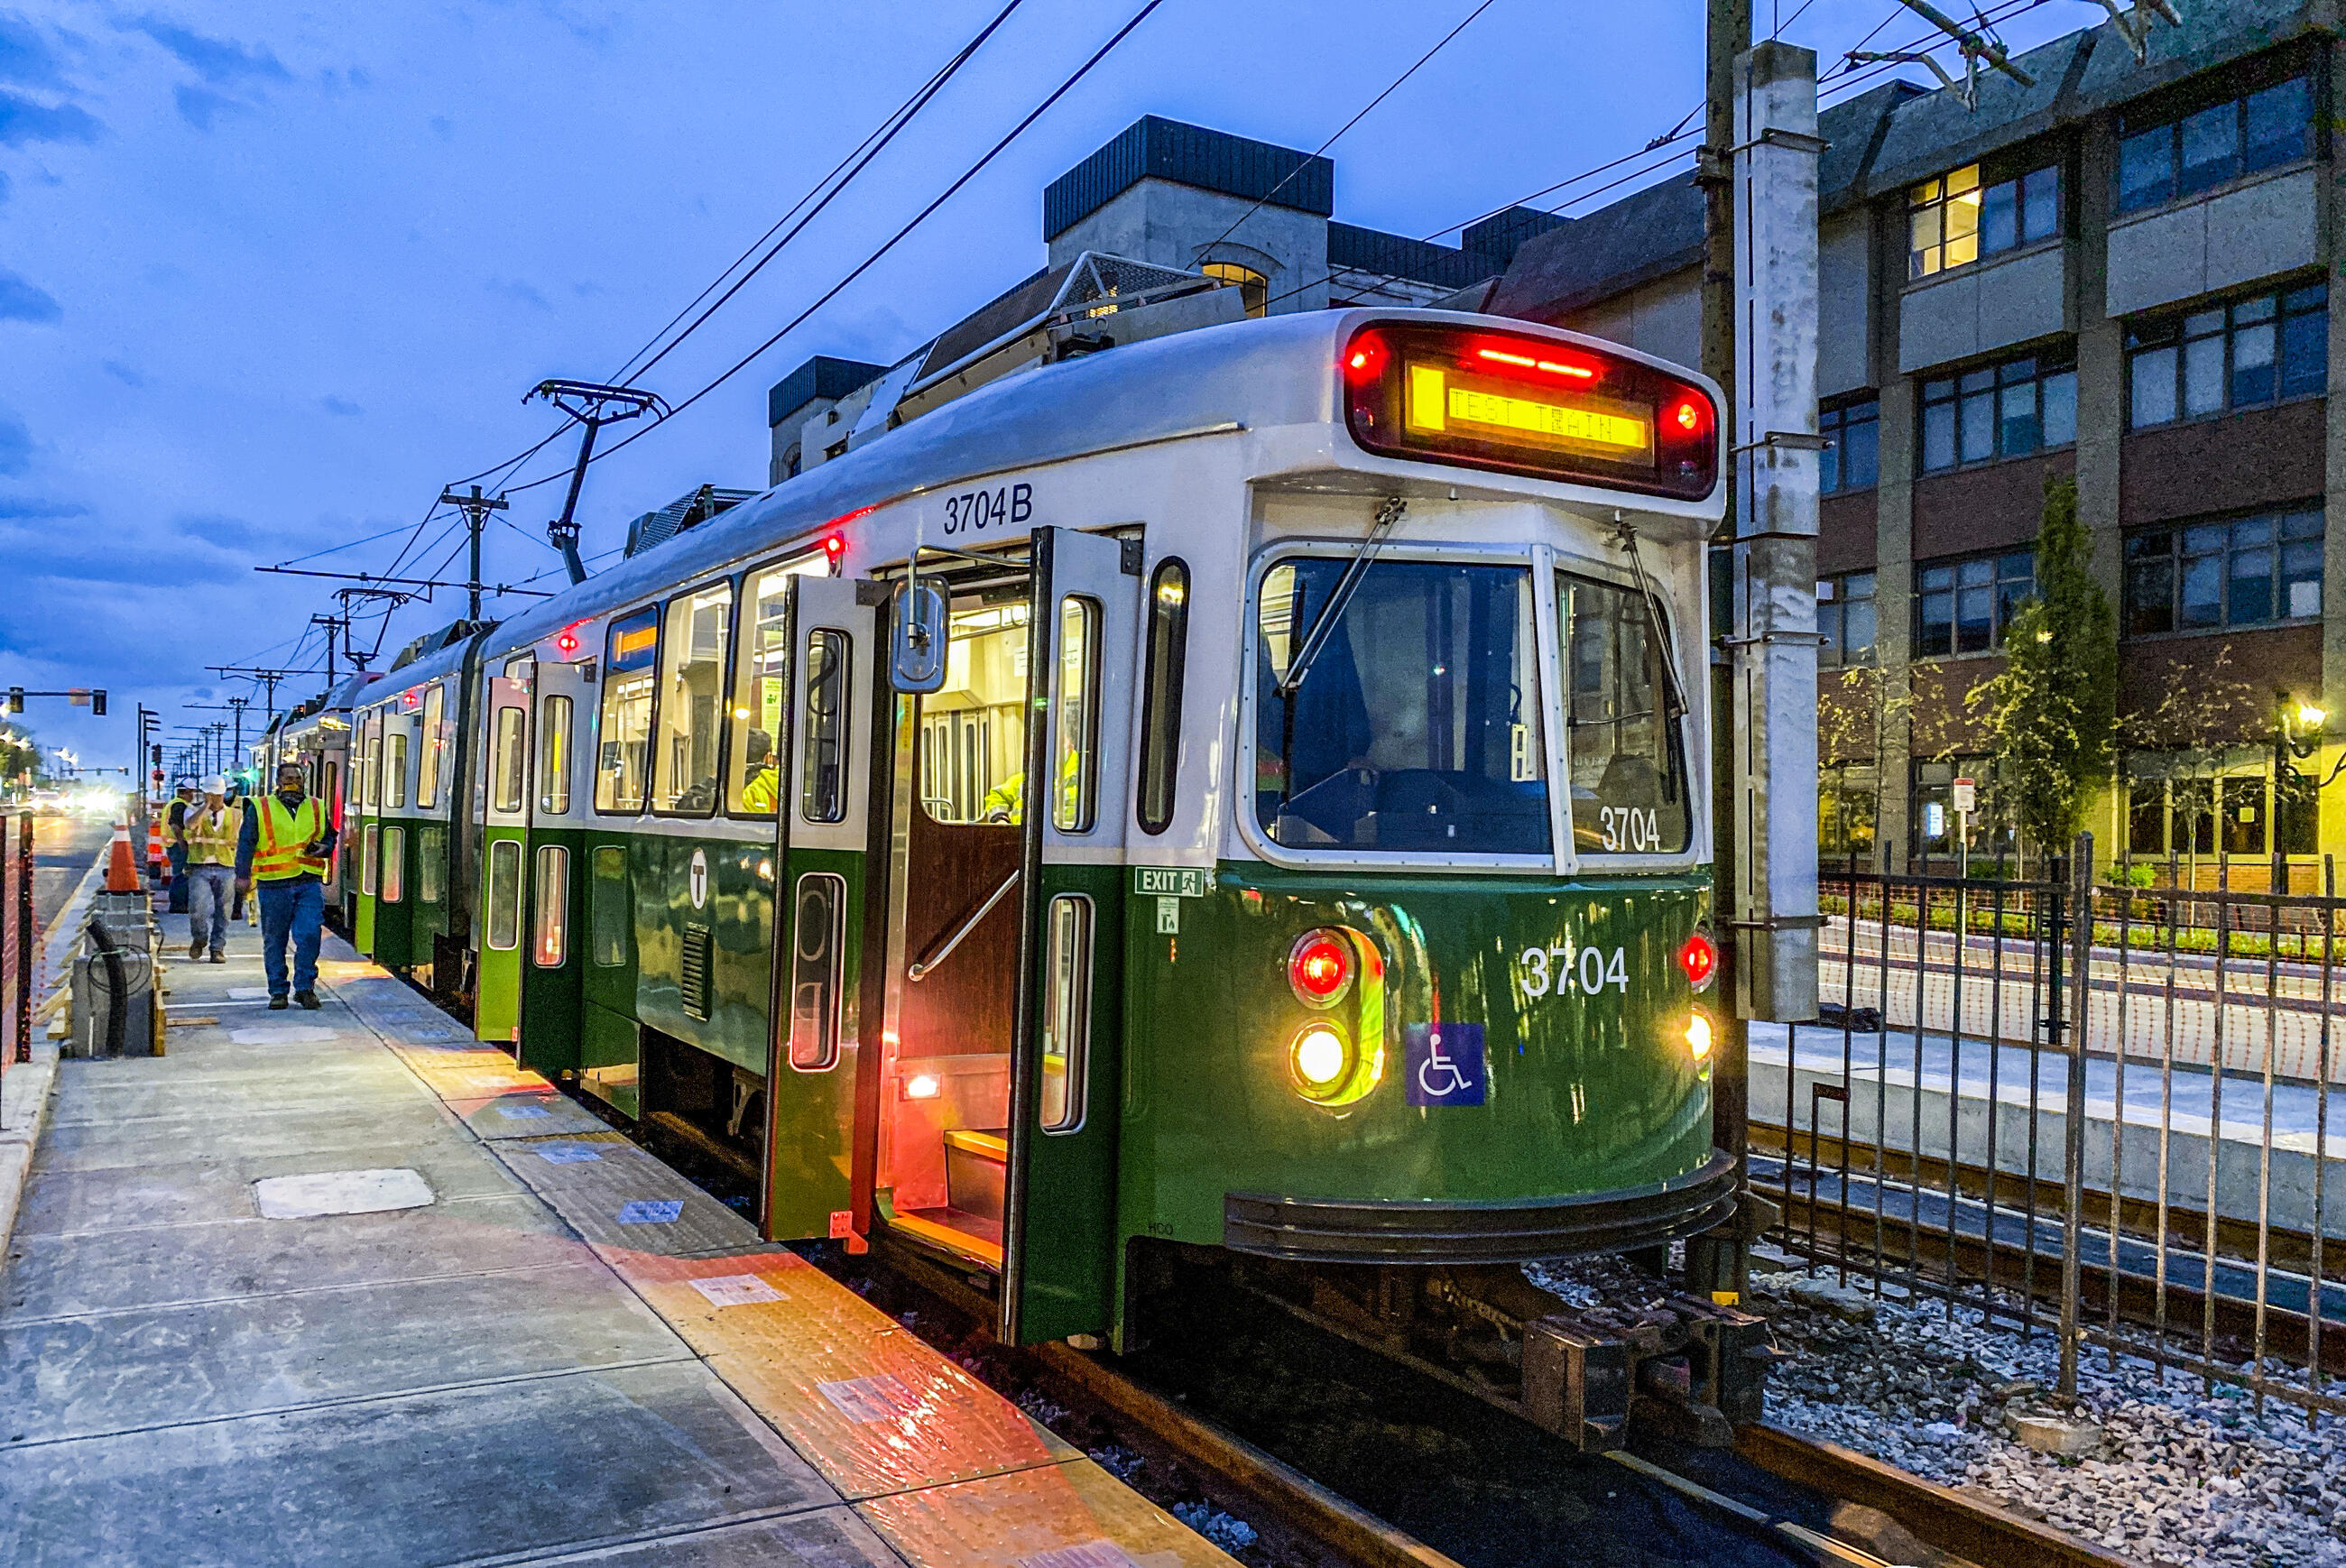 Train testing is taking place for the return to service on the Green Line B